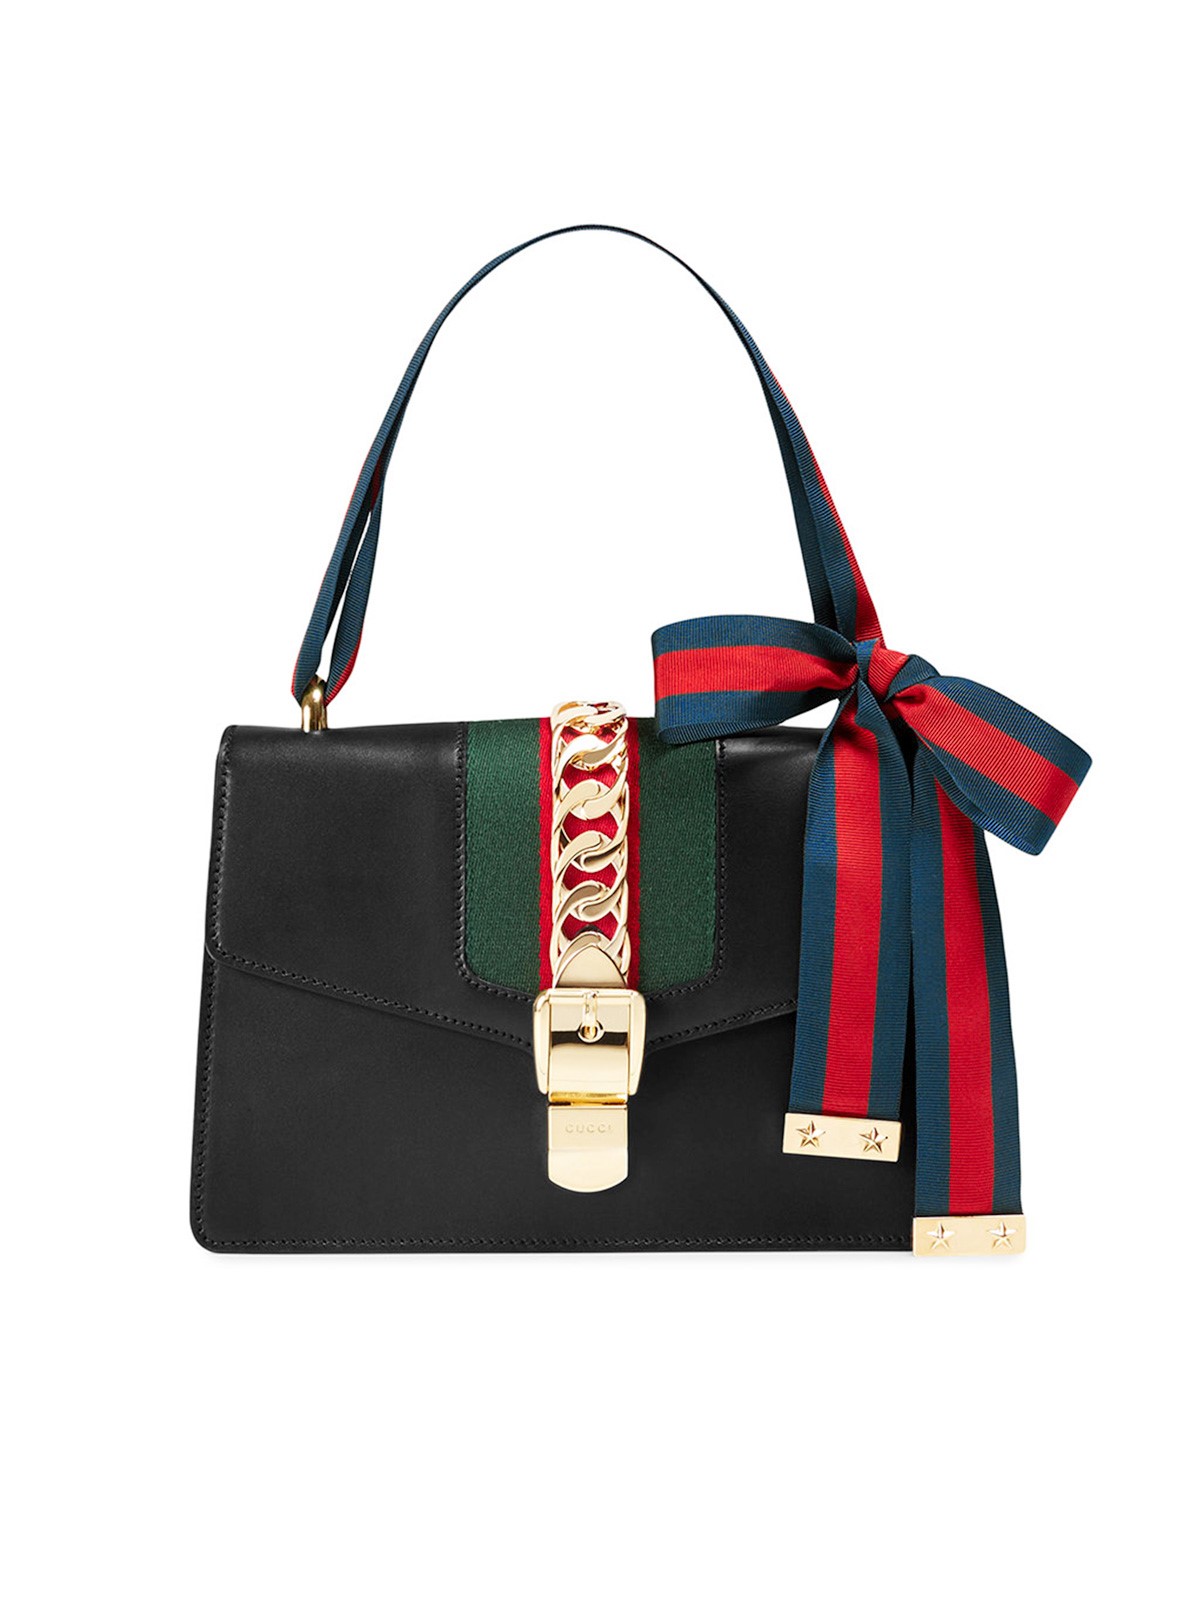 gucci SYLVIE BAG available on www.semadata.org - 21649